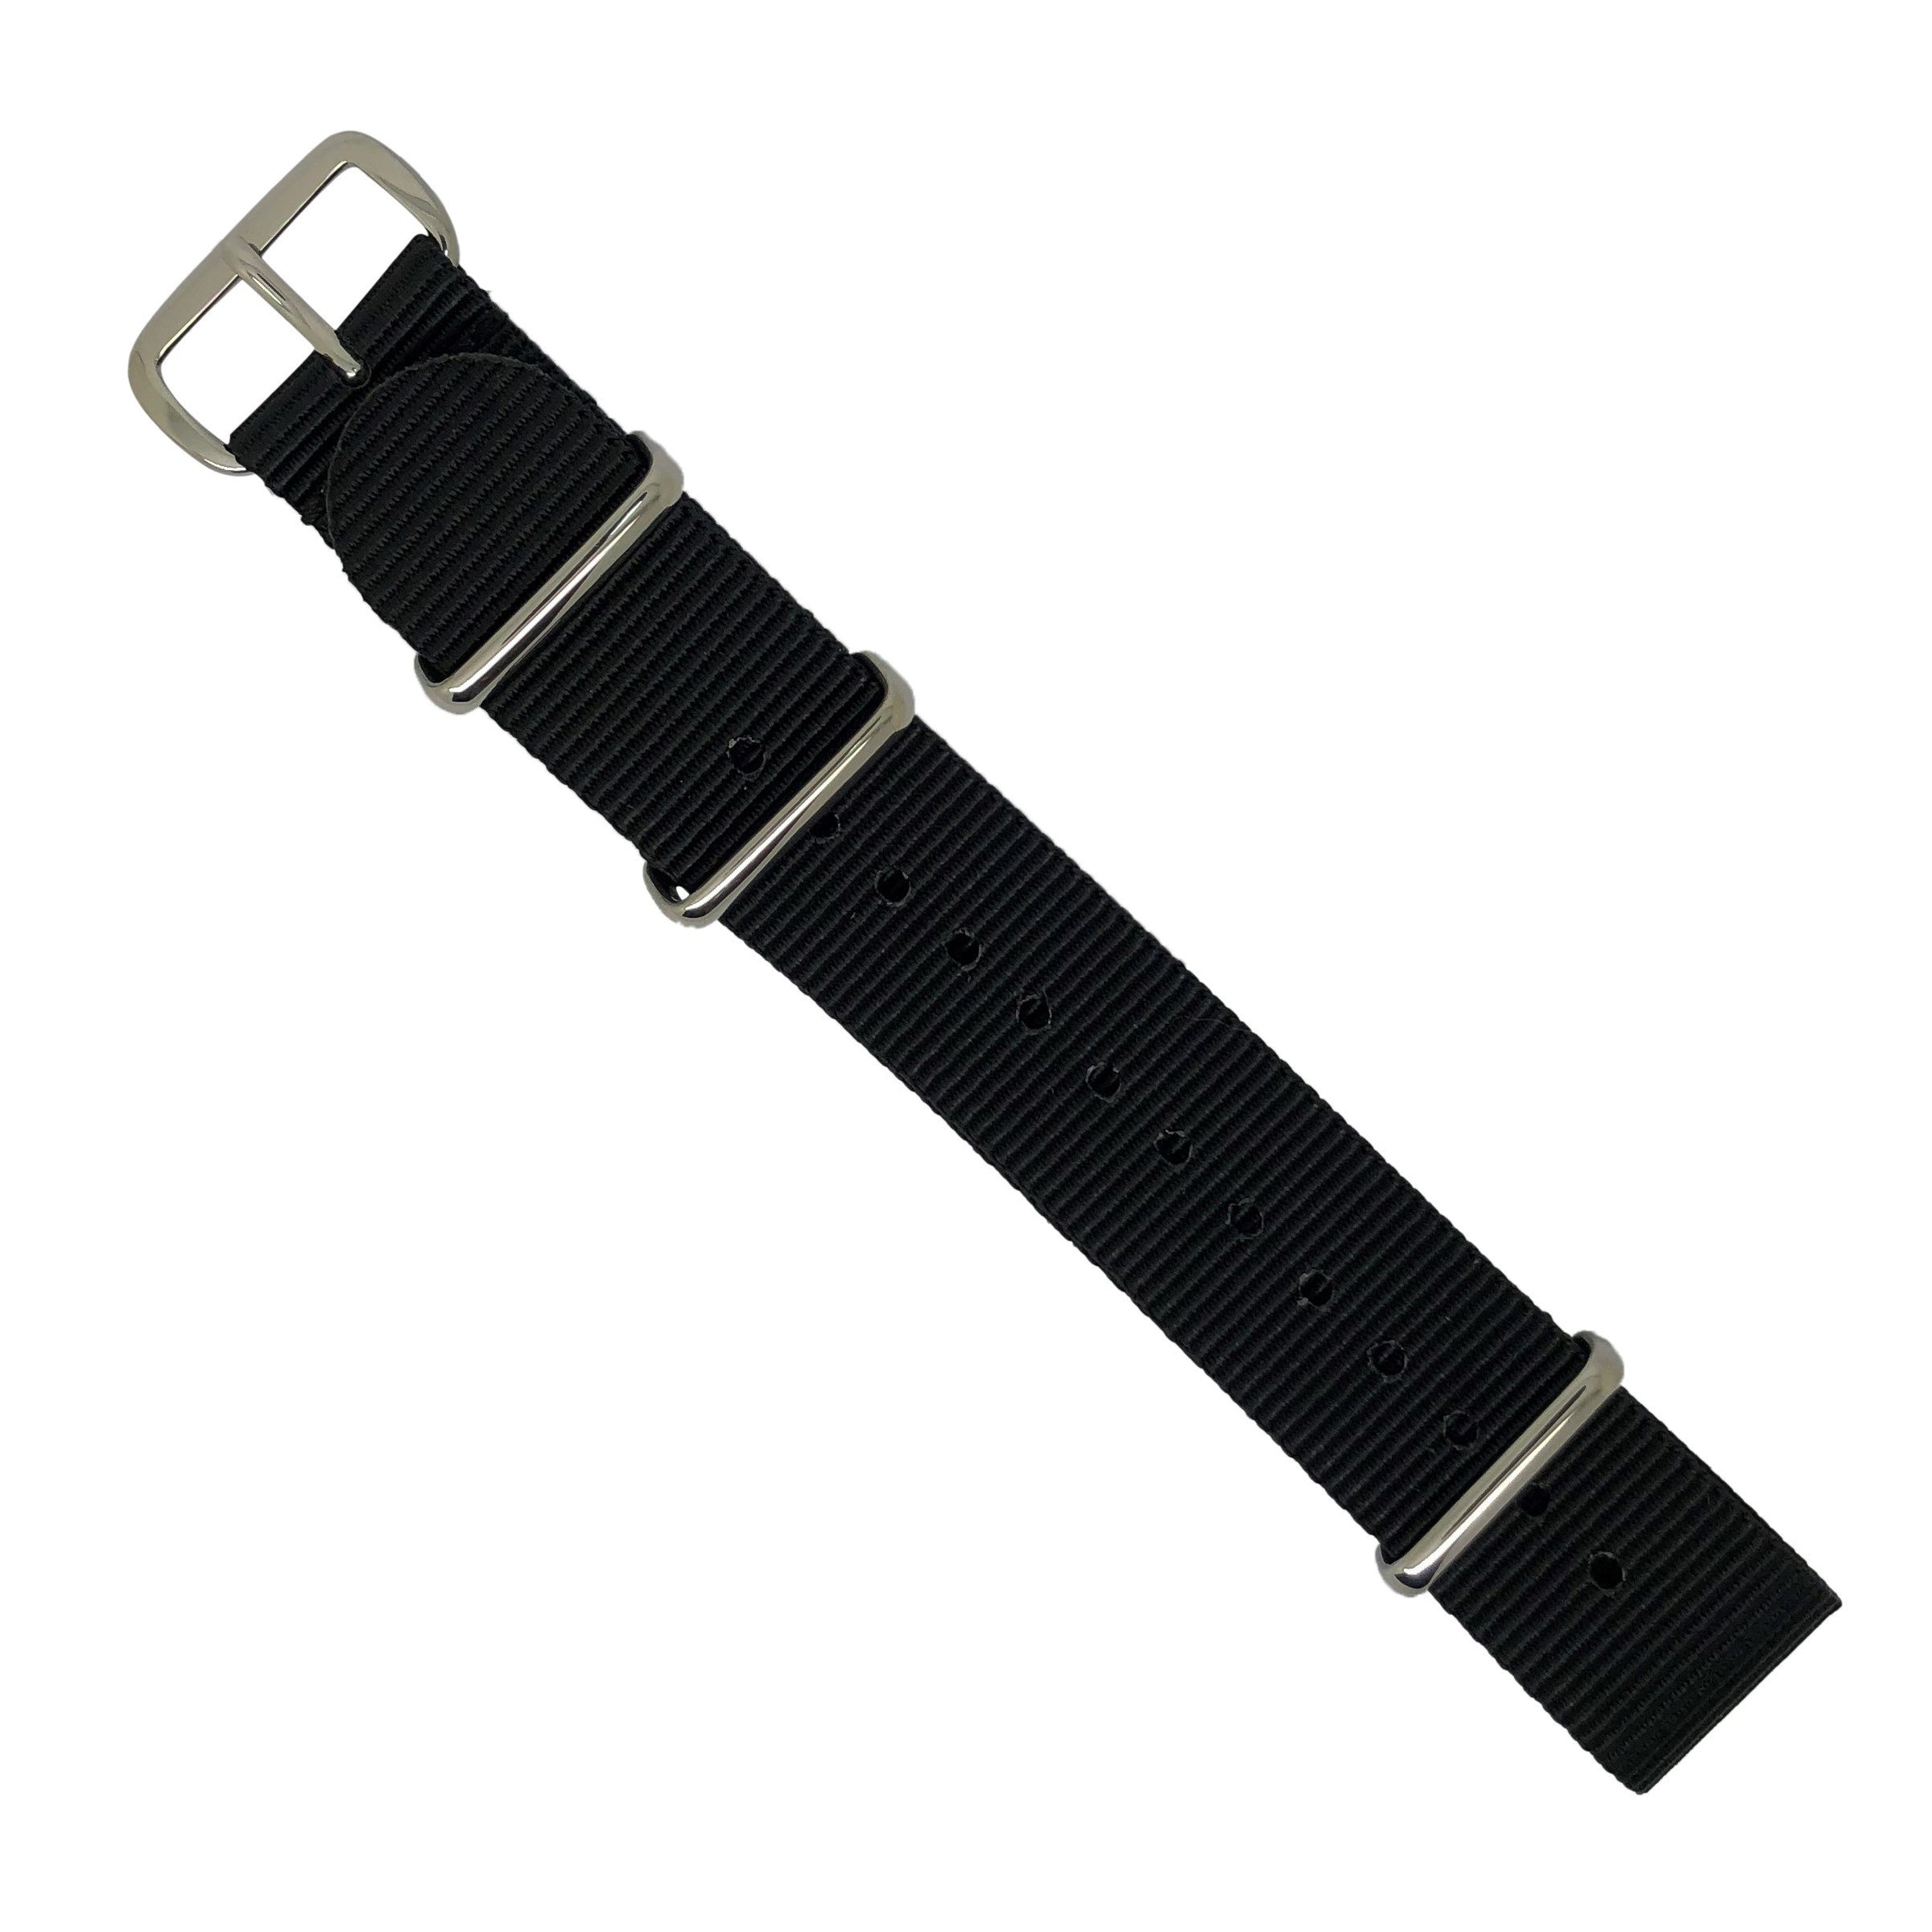 Premium Nato Strap in Black with Polished Silver Buckle (18mm) - Nomadstore Singapore